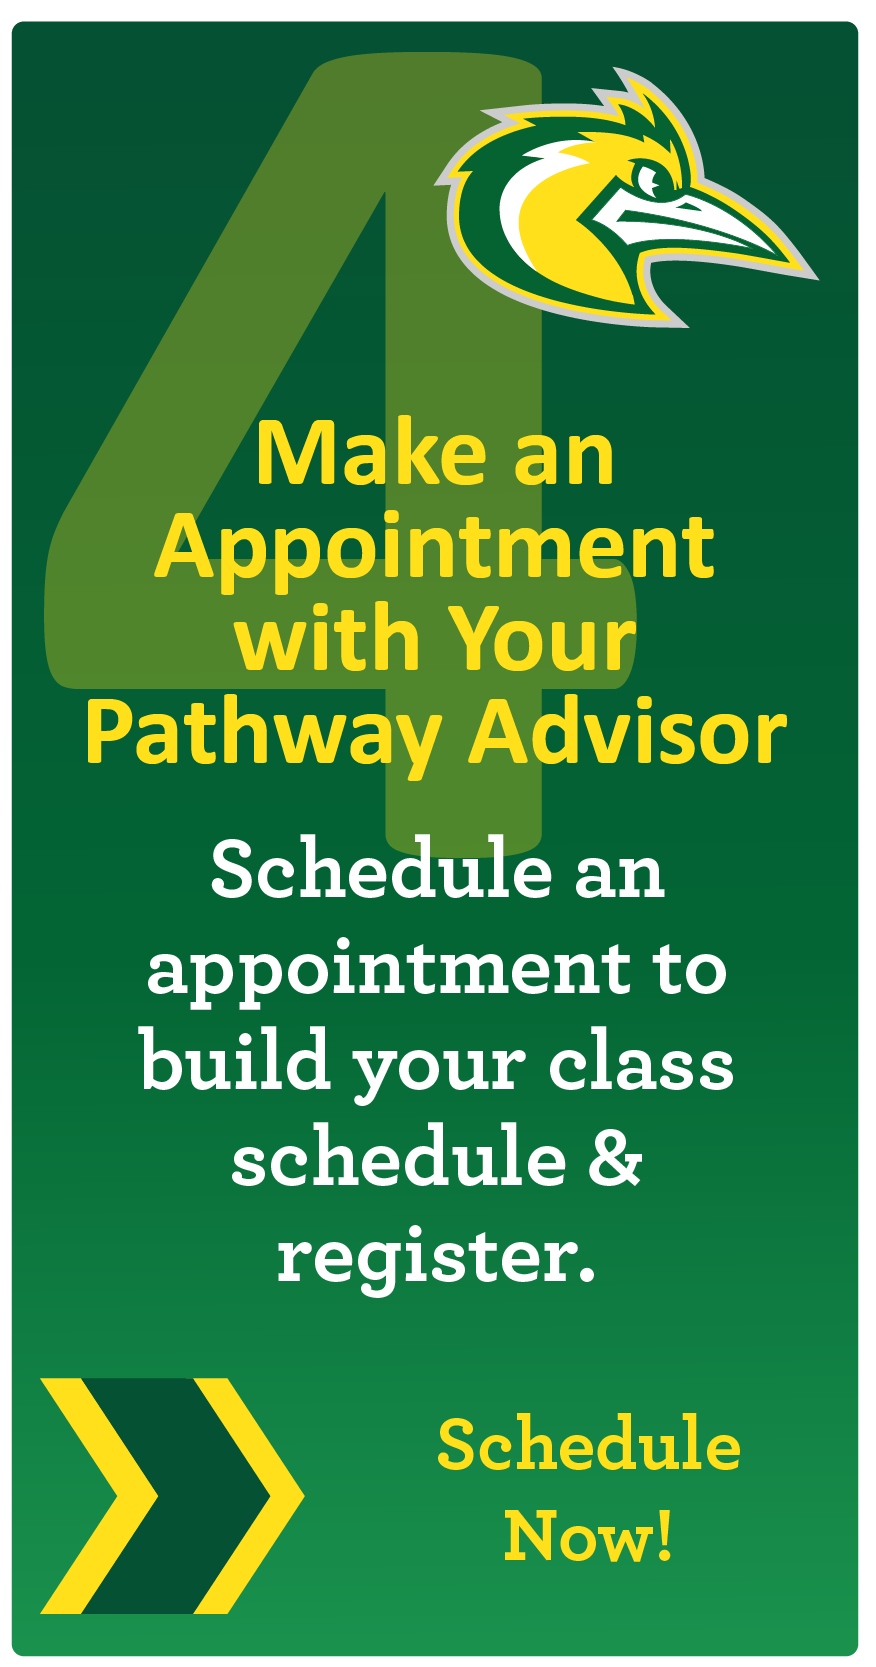 Make an appointment with your pathway advisor